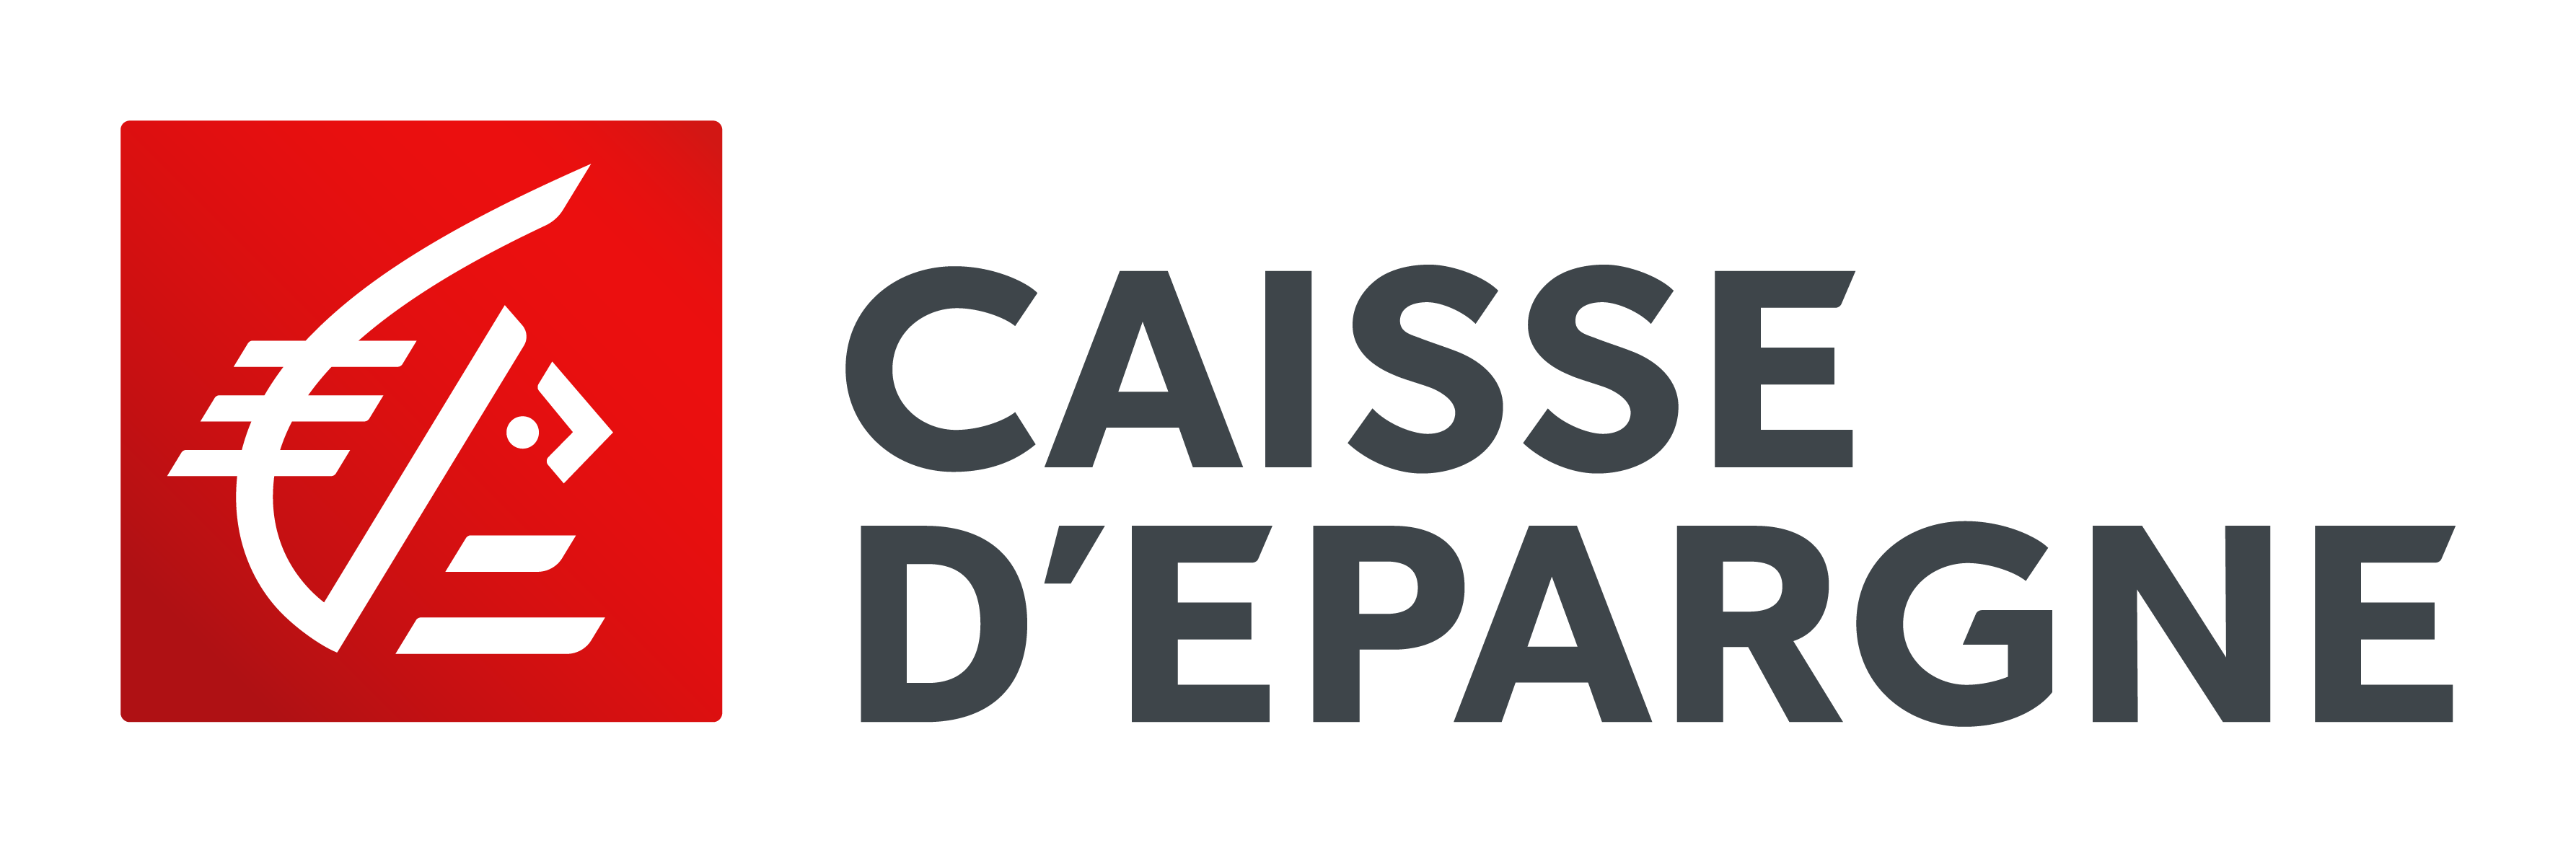 06-Caisse Epargne.png